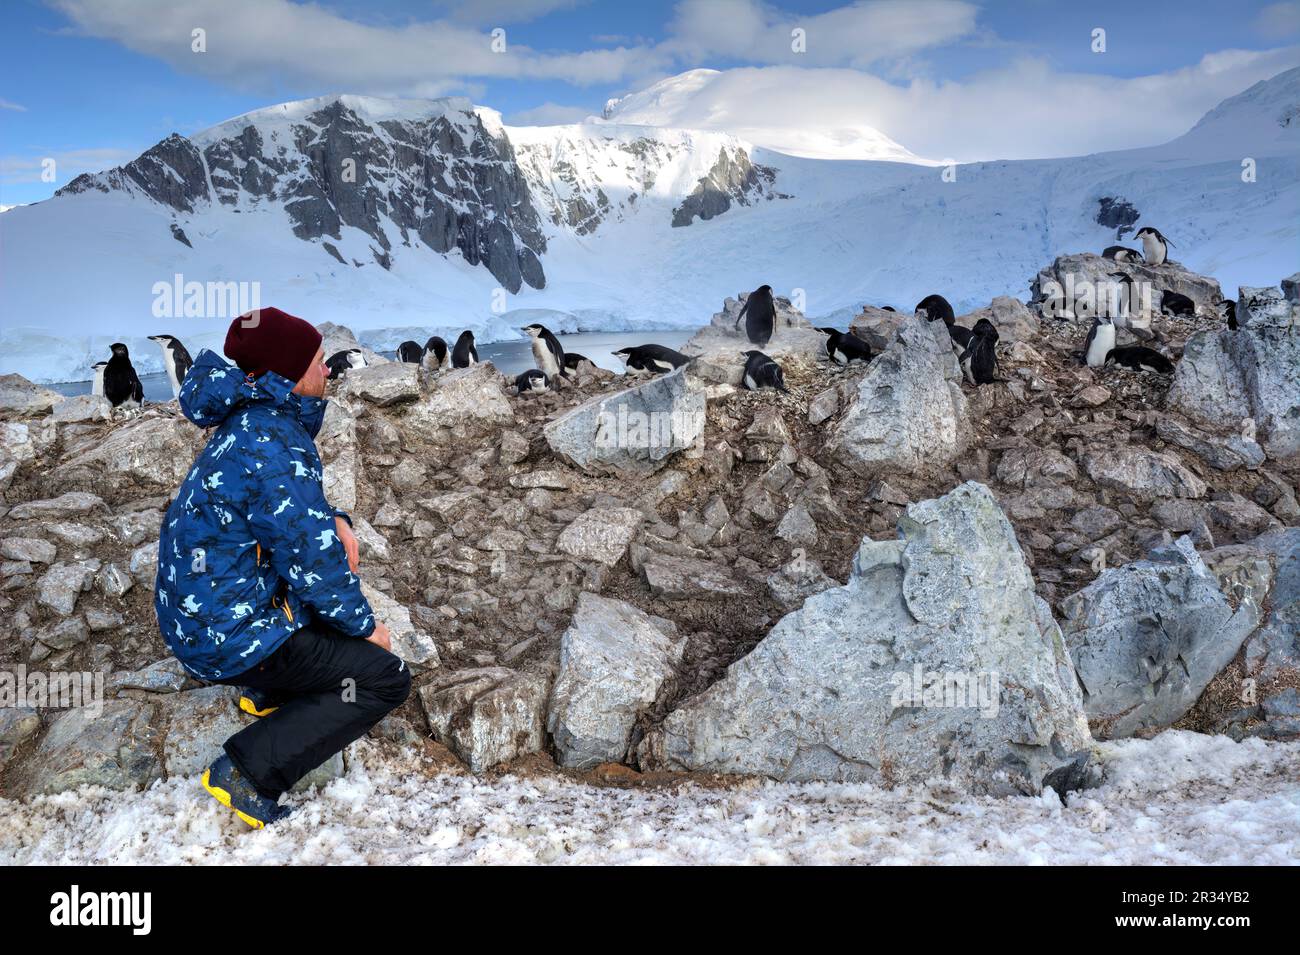 A tourist sits next to penguins in Antarctica Stock Photo